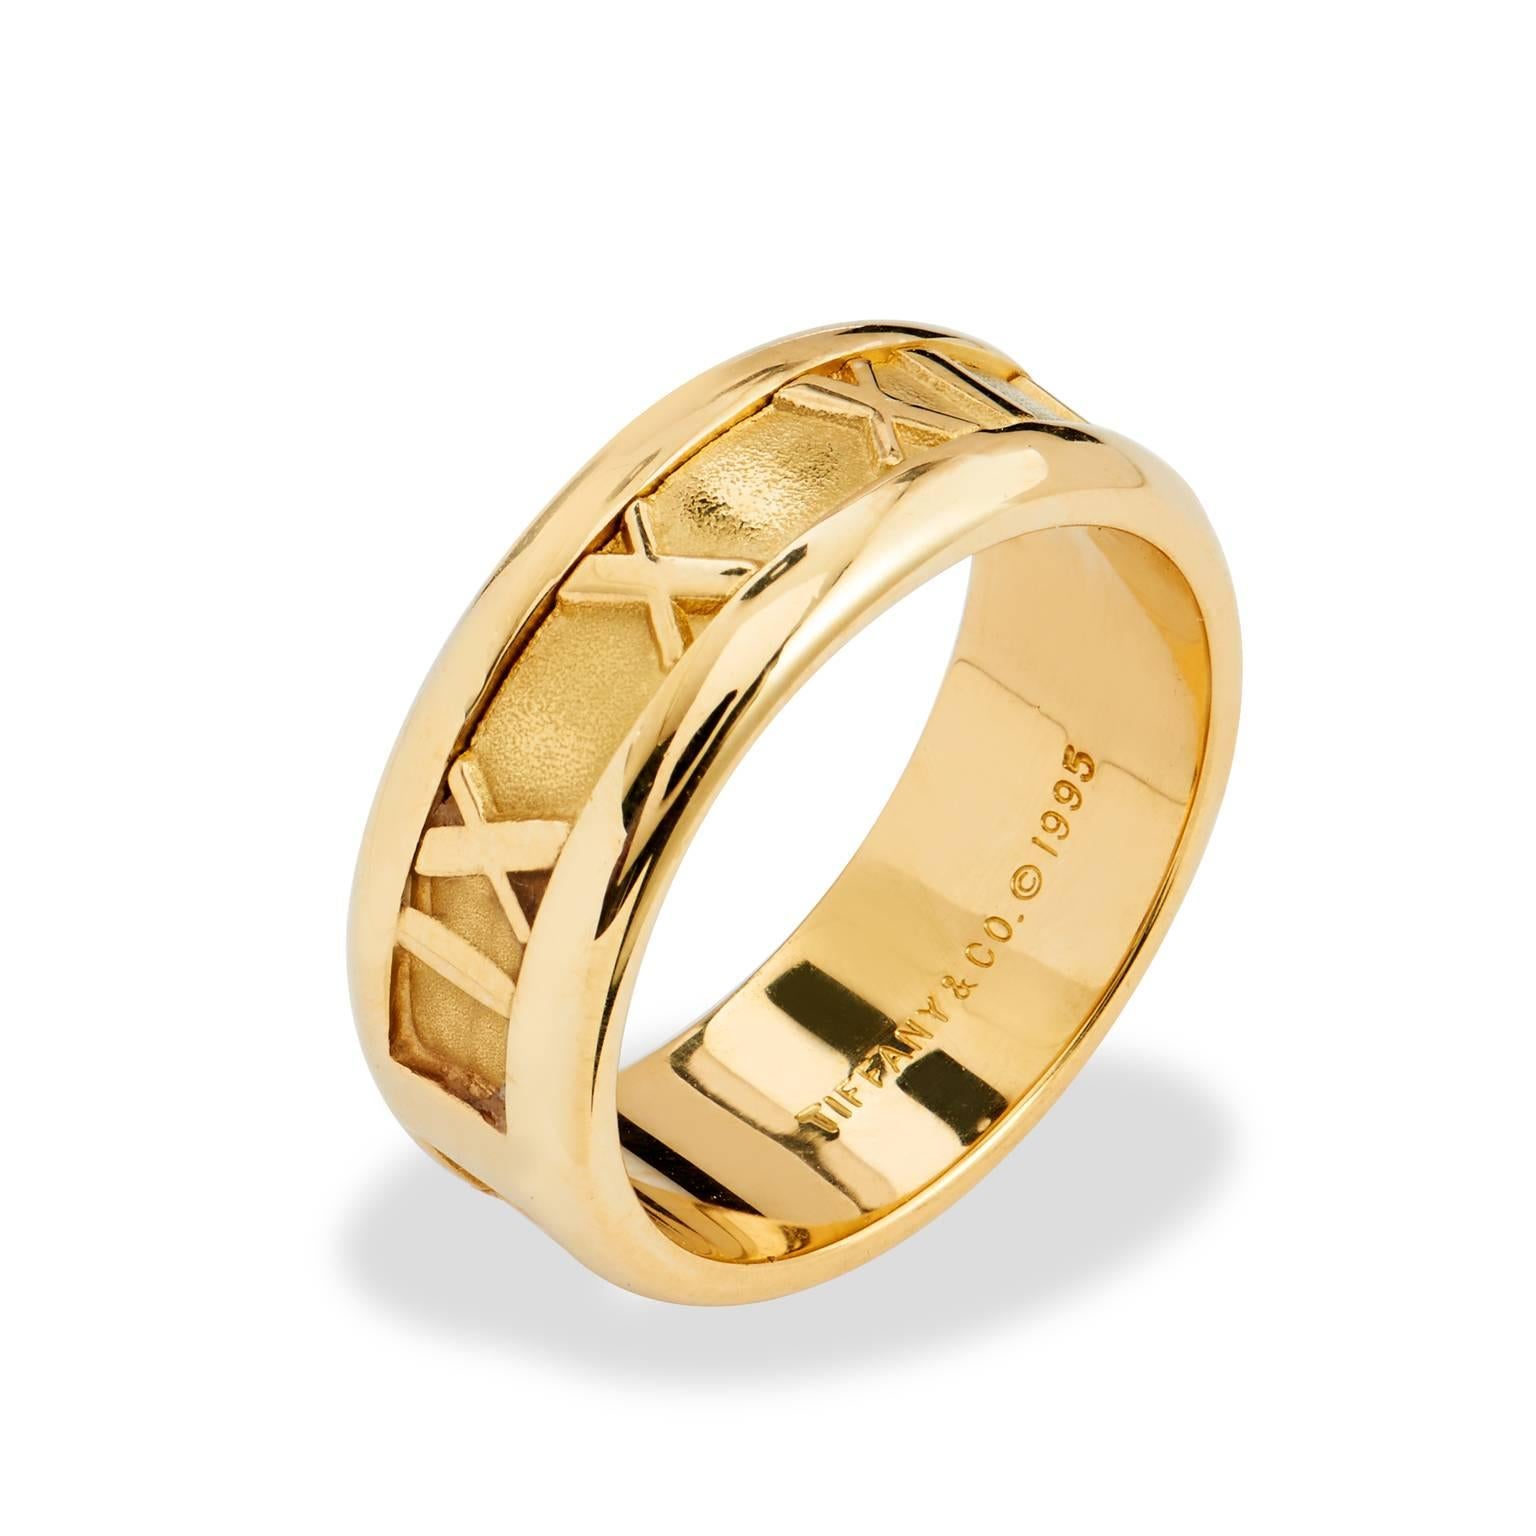 This Tiffany & Co Atlas ring is crafted in 18kt yellow gold and a treasured piece of Hallmark Tiffany & Co 1995. A contemporary design, this set is a part of the Atlas collection which  features divine designs that are inspired by Greek mythology